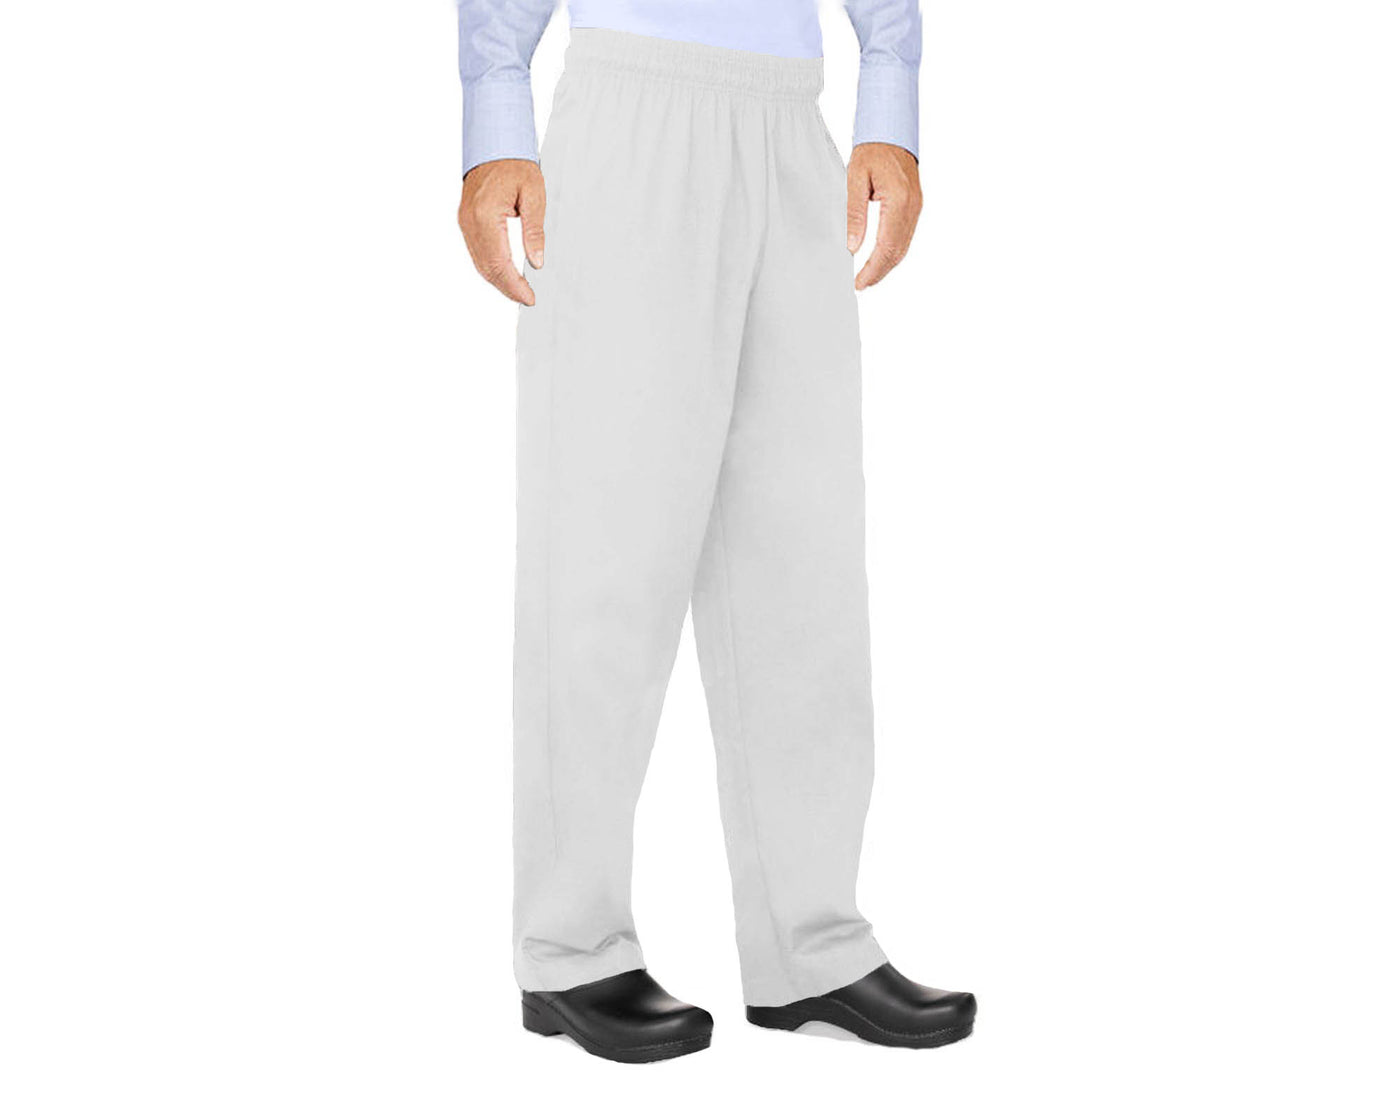 man wearing White chef pant with elastic waist